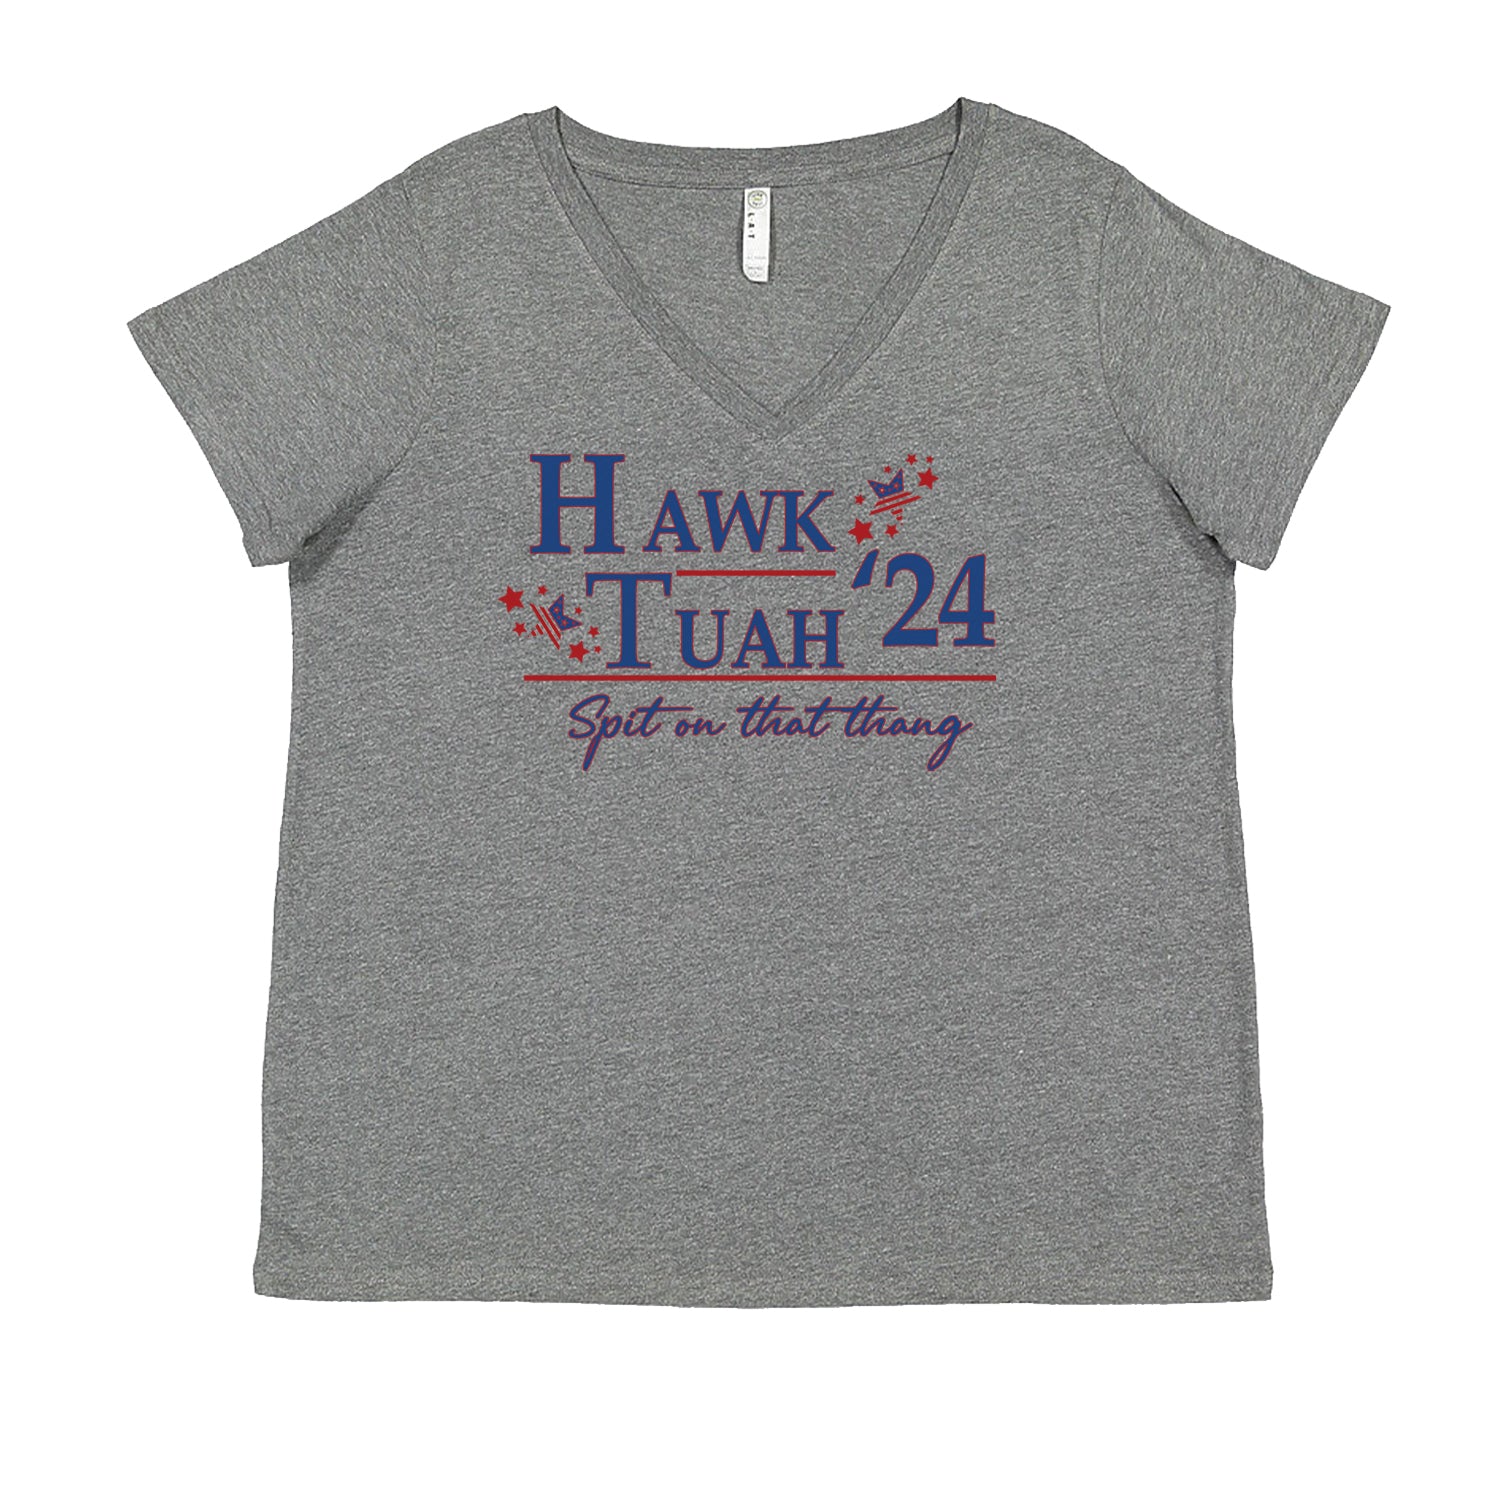 Vote For Hawk Tuah Spit On That Thang 2024 Ladies V-Neck T-shirt Heather Grey